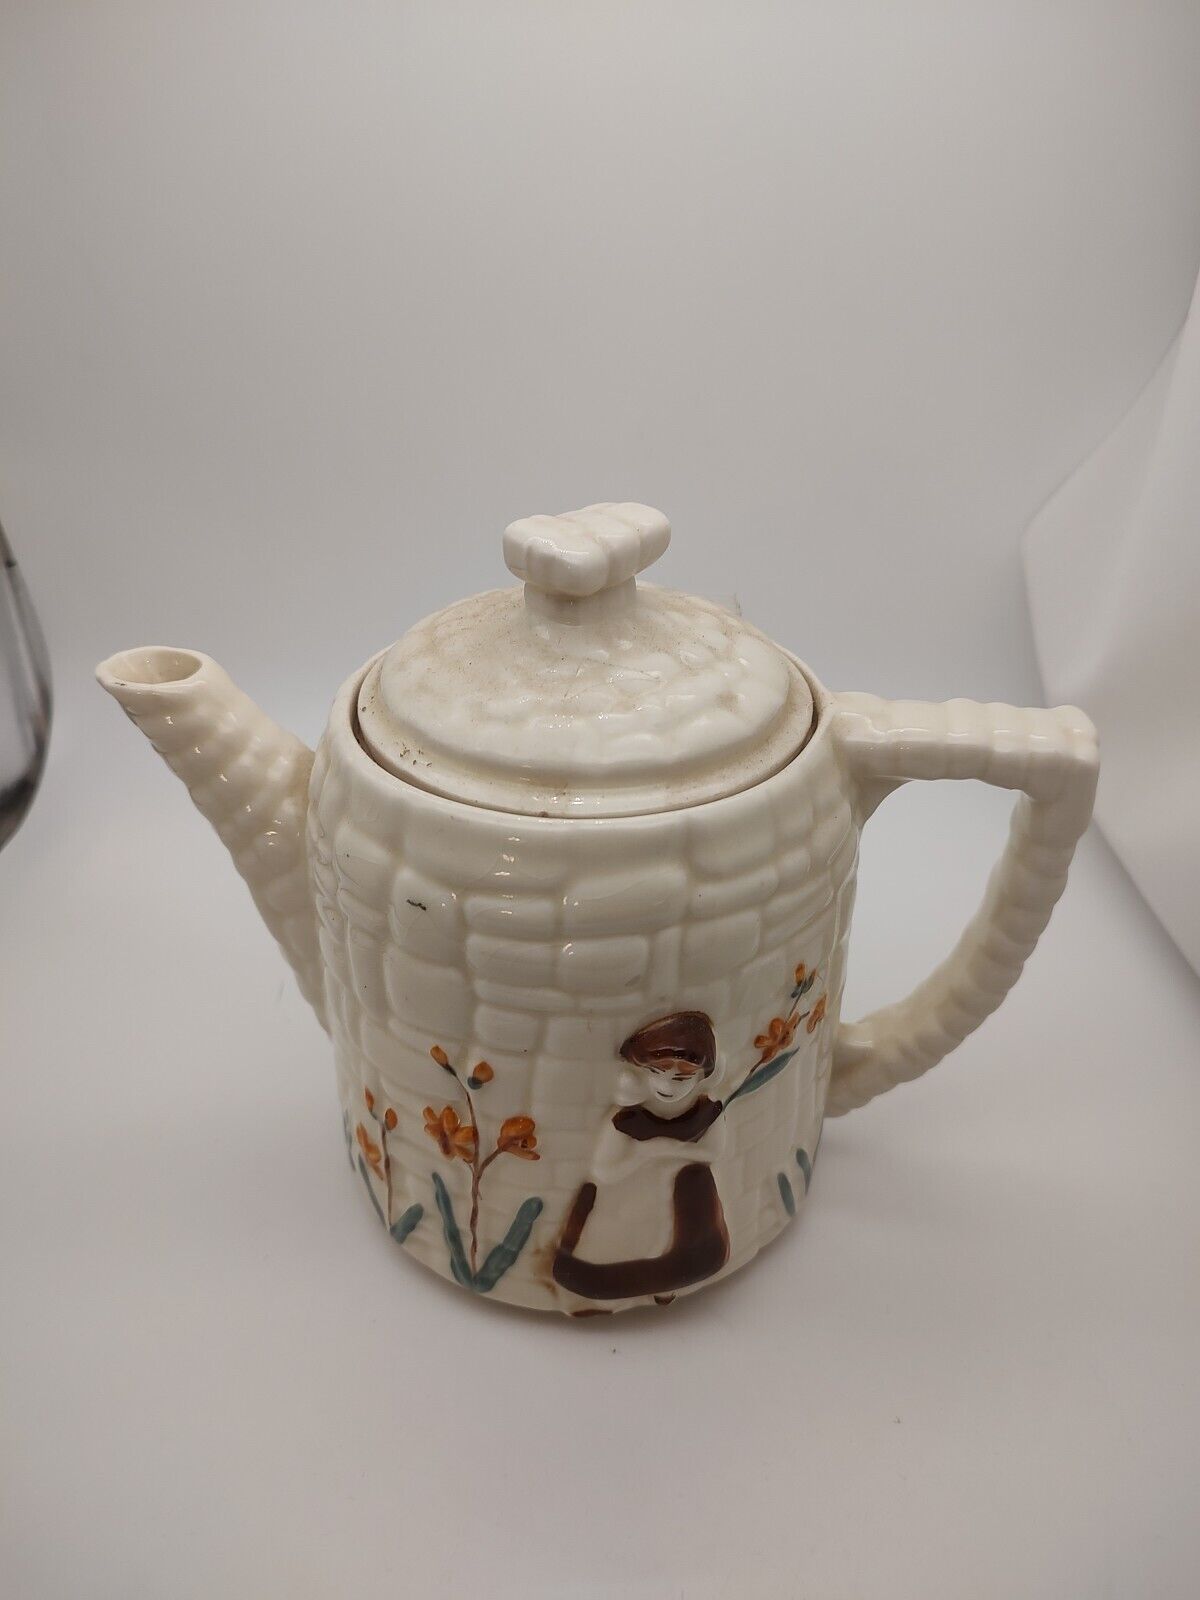 Vintage Porceleir Cobblestone China Teapot Cream Color Young Woman With Flowers